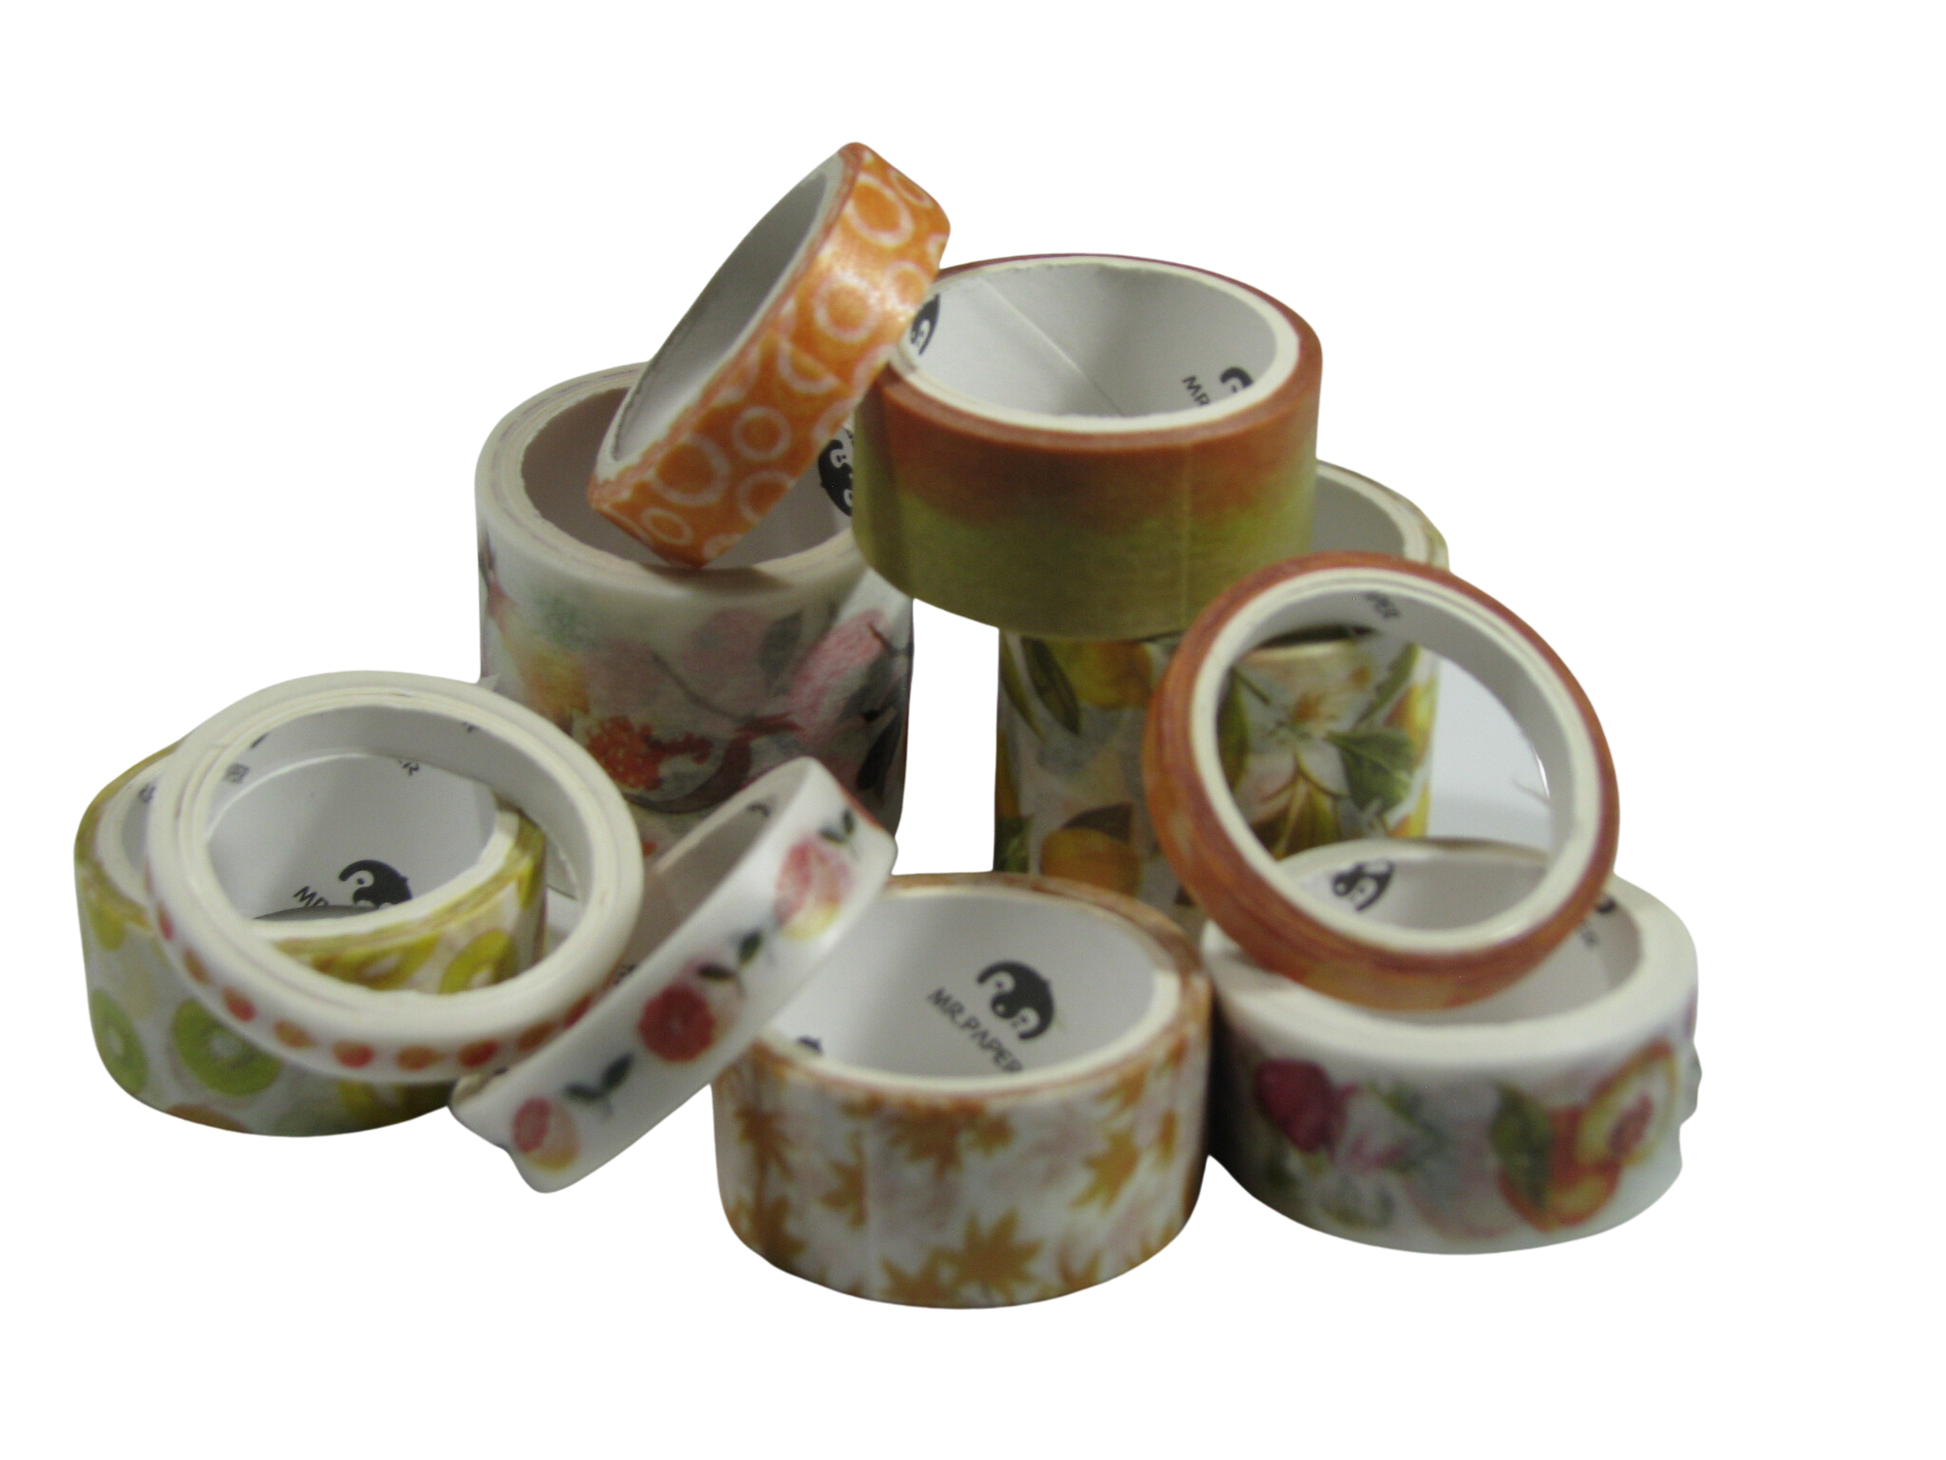 Benvo Floral Washi Tape 33 Feet Long Each Roll DIY Japanese Masking Tape  Decorative Masking Tape Scrapbooking Tape for Arts Crafts Office Party  Supplies and Gift Wrapping 